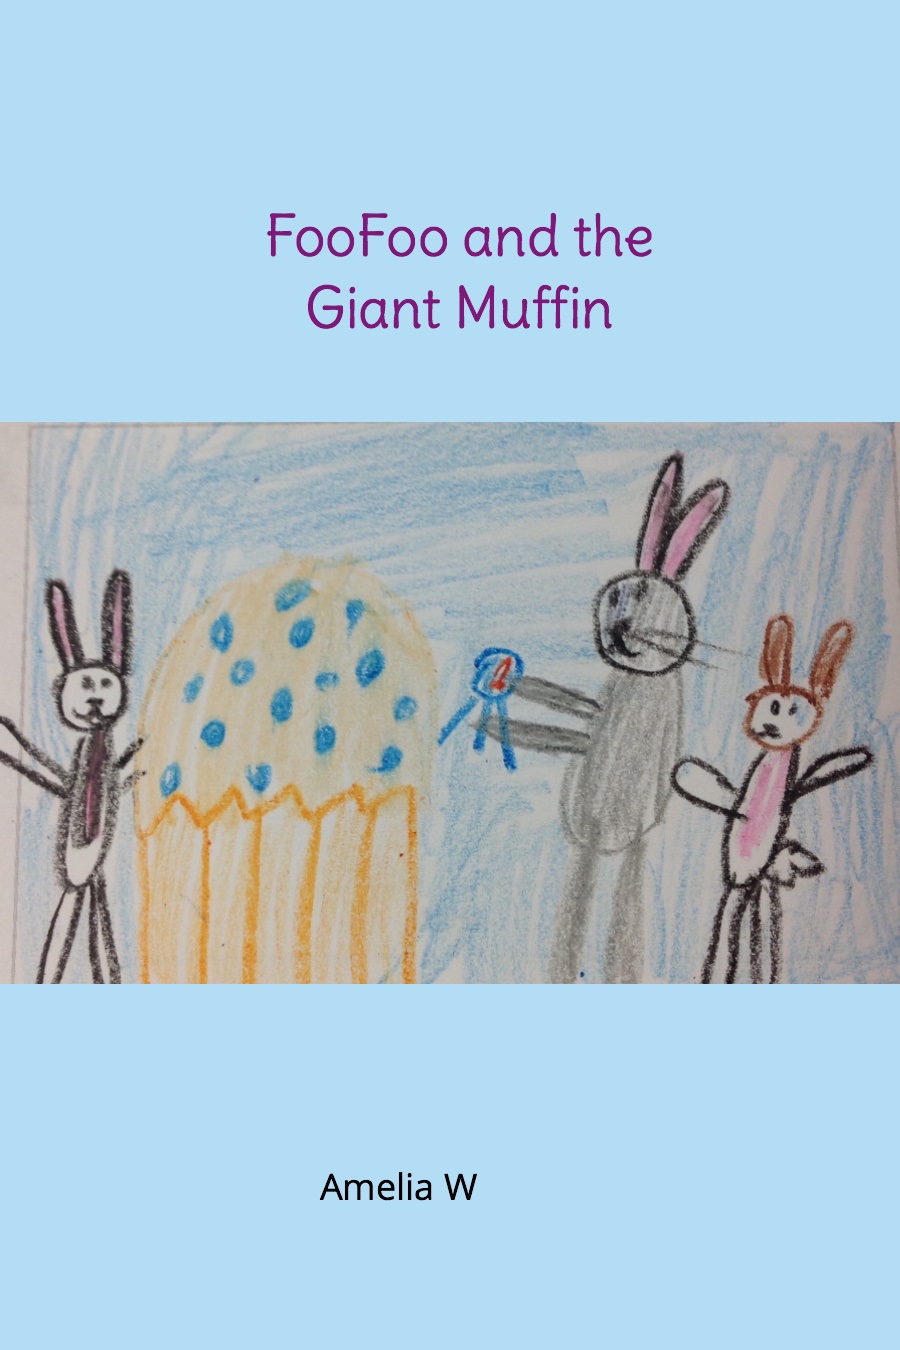 FooFoo and the Giant Muffin by Amelia W